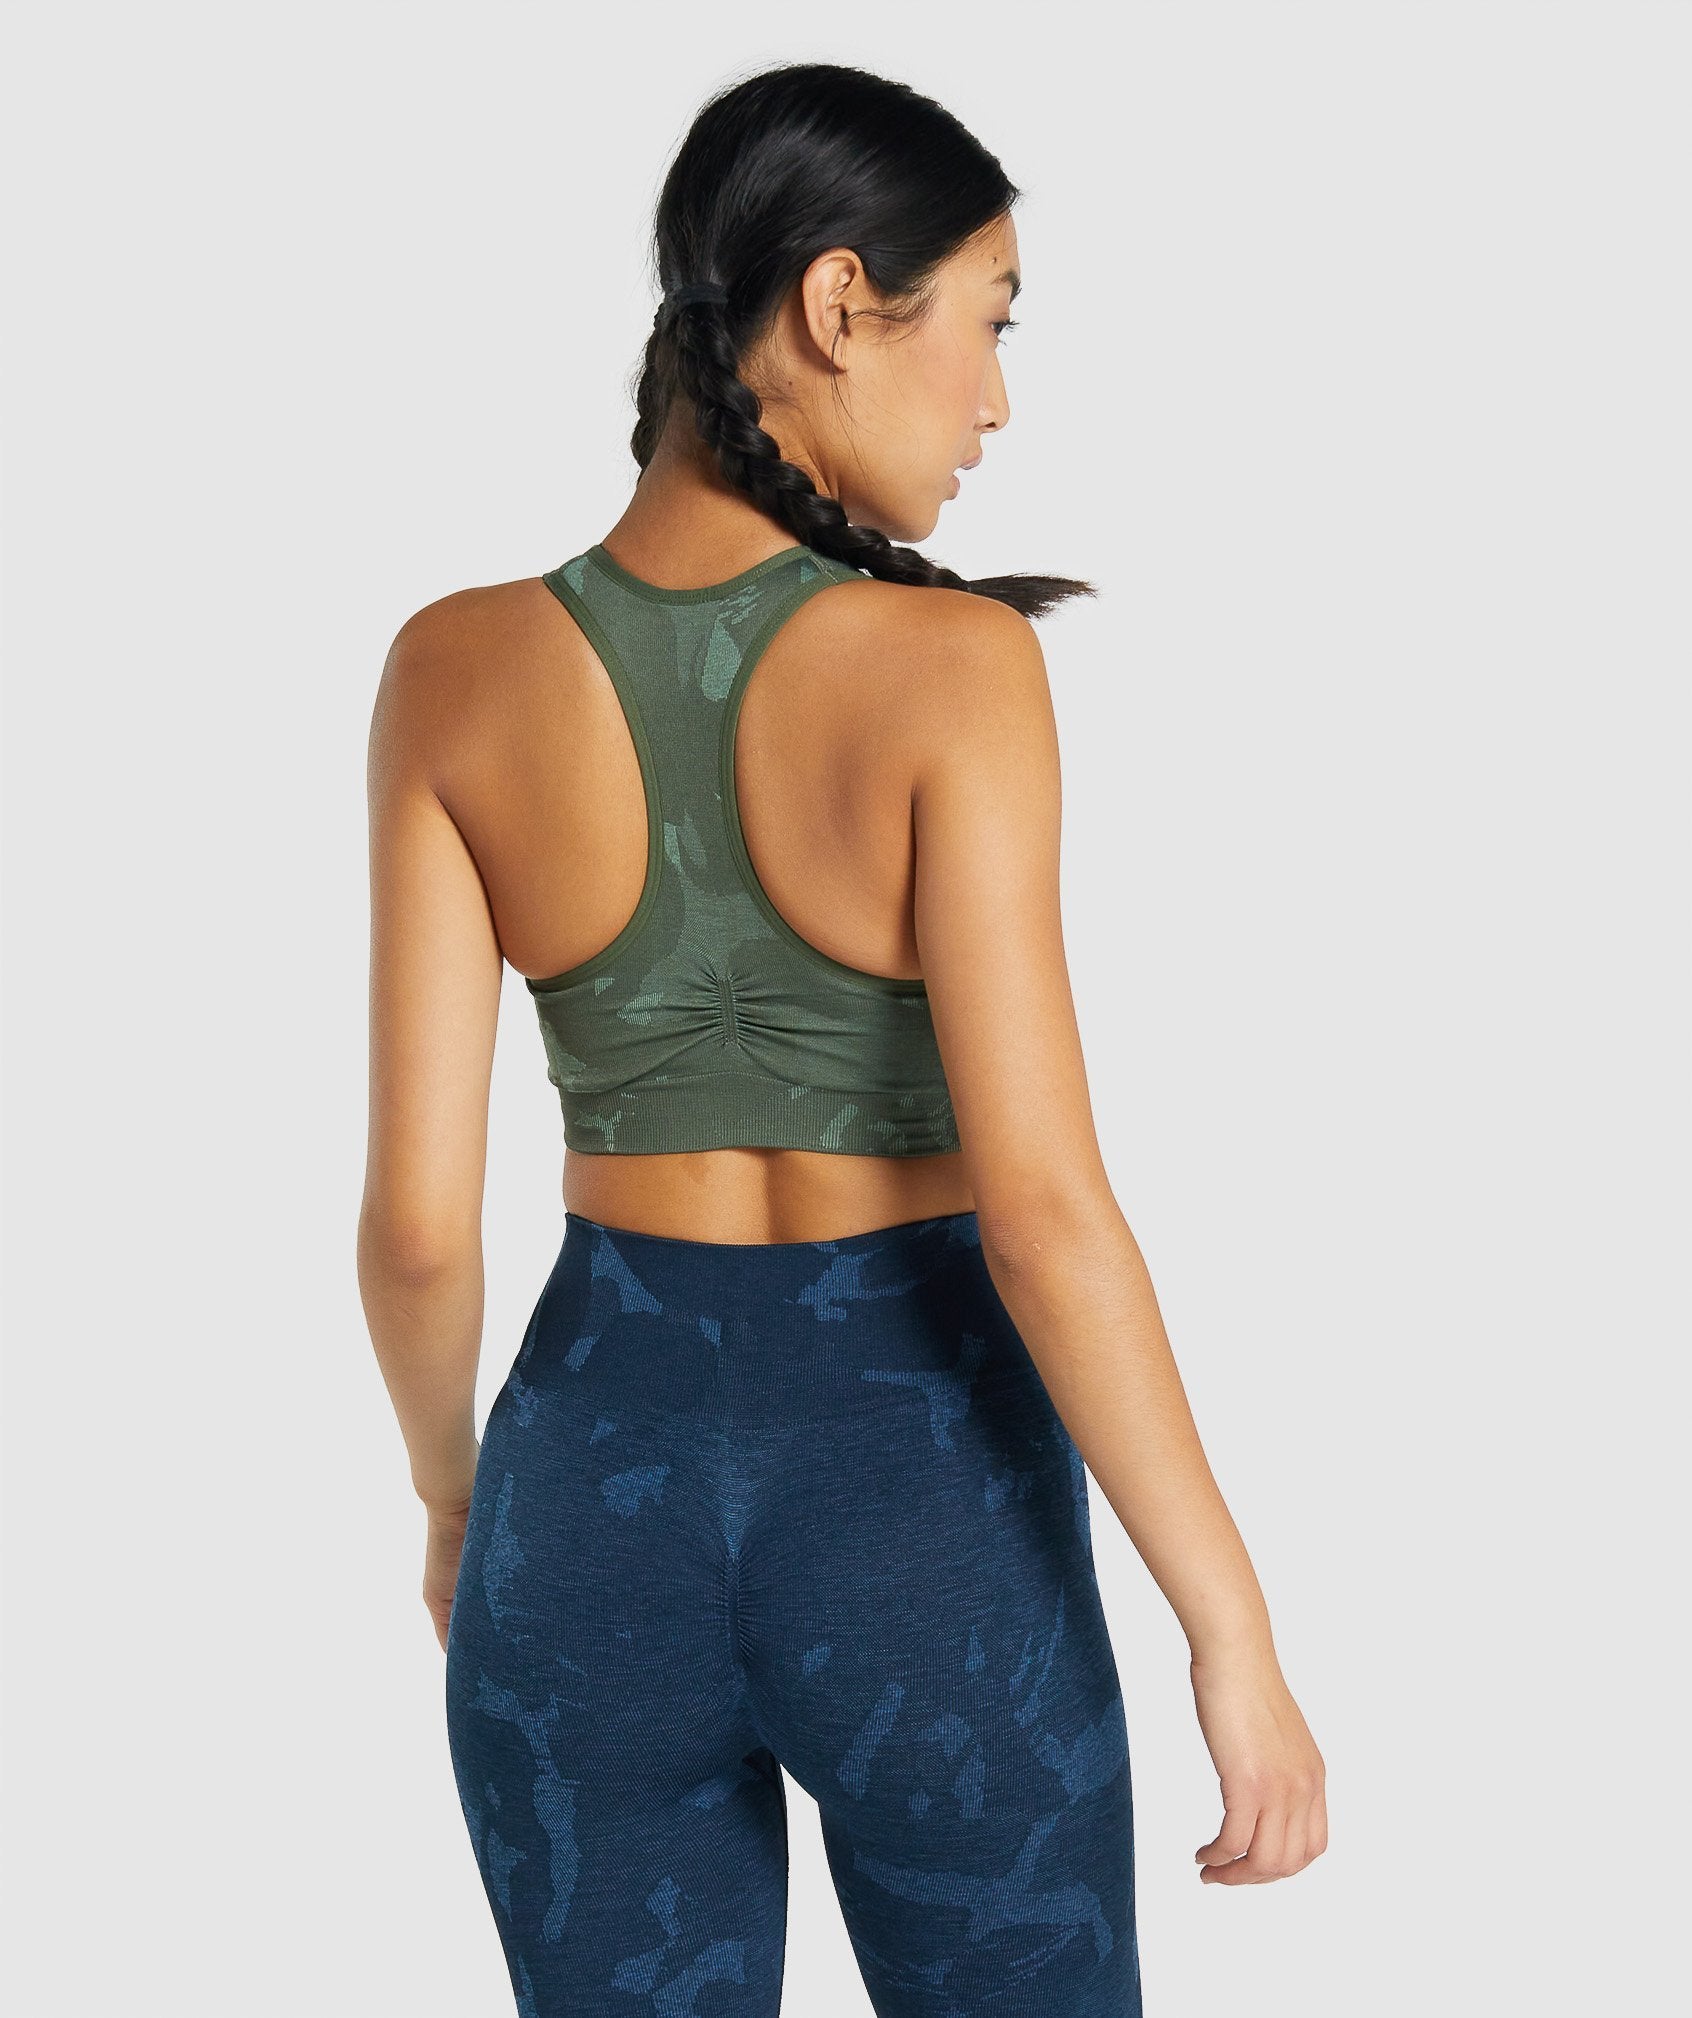 Gymshark Camo Seamless Sports Bra (Sage Green) Green Size XS - $40 (11% Off  Retail) New With Tags - From Alannah